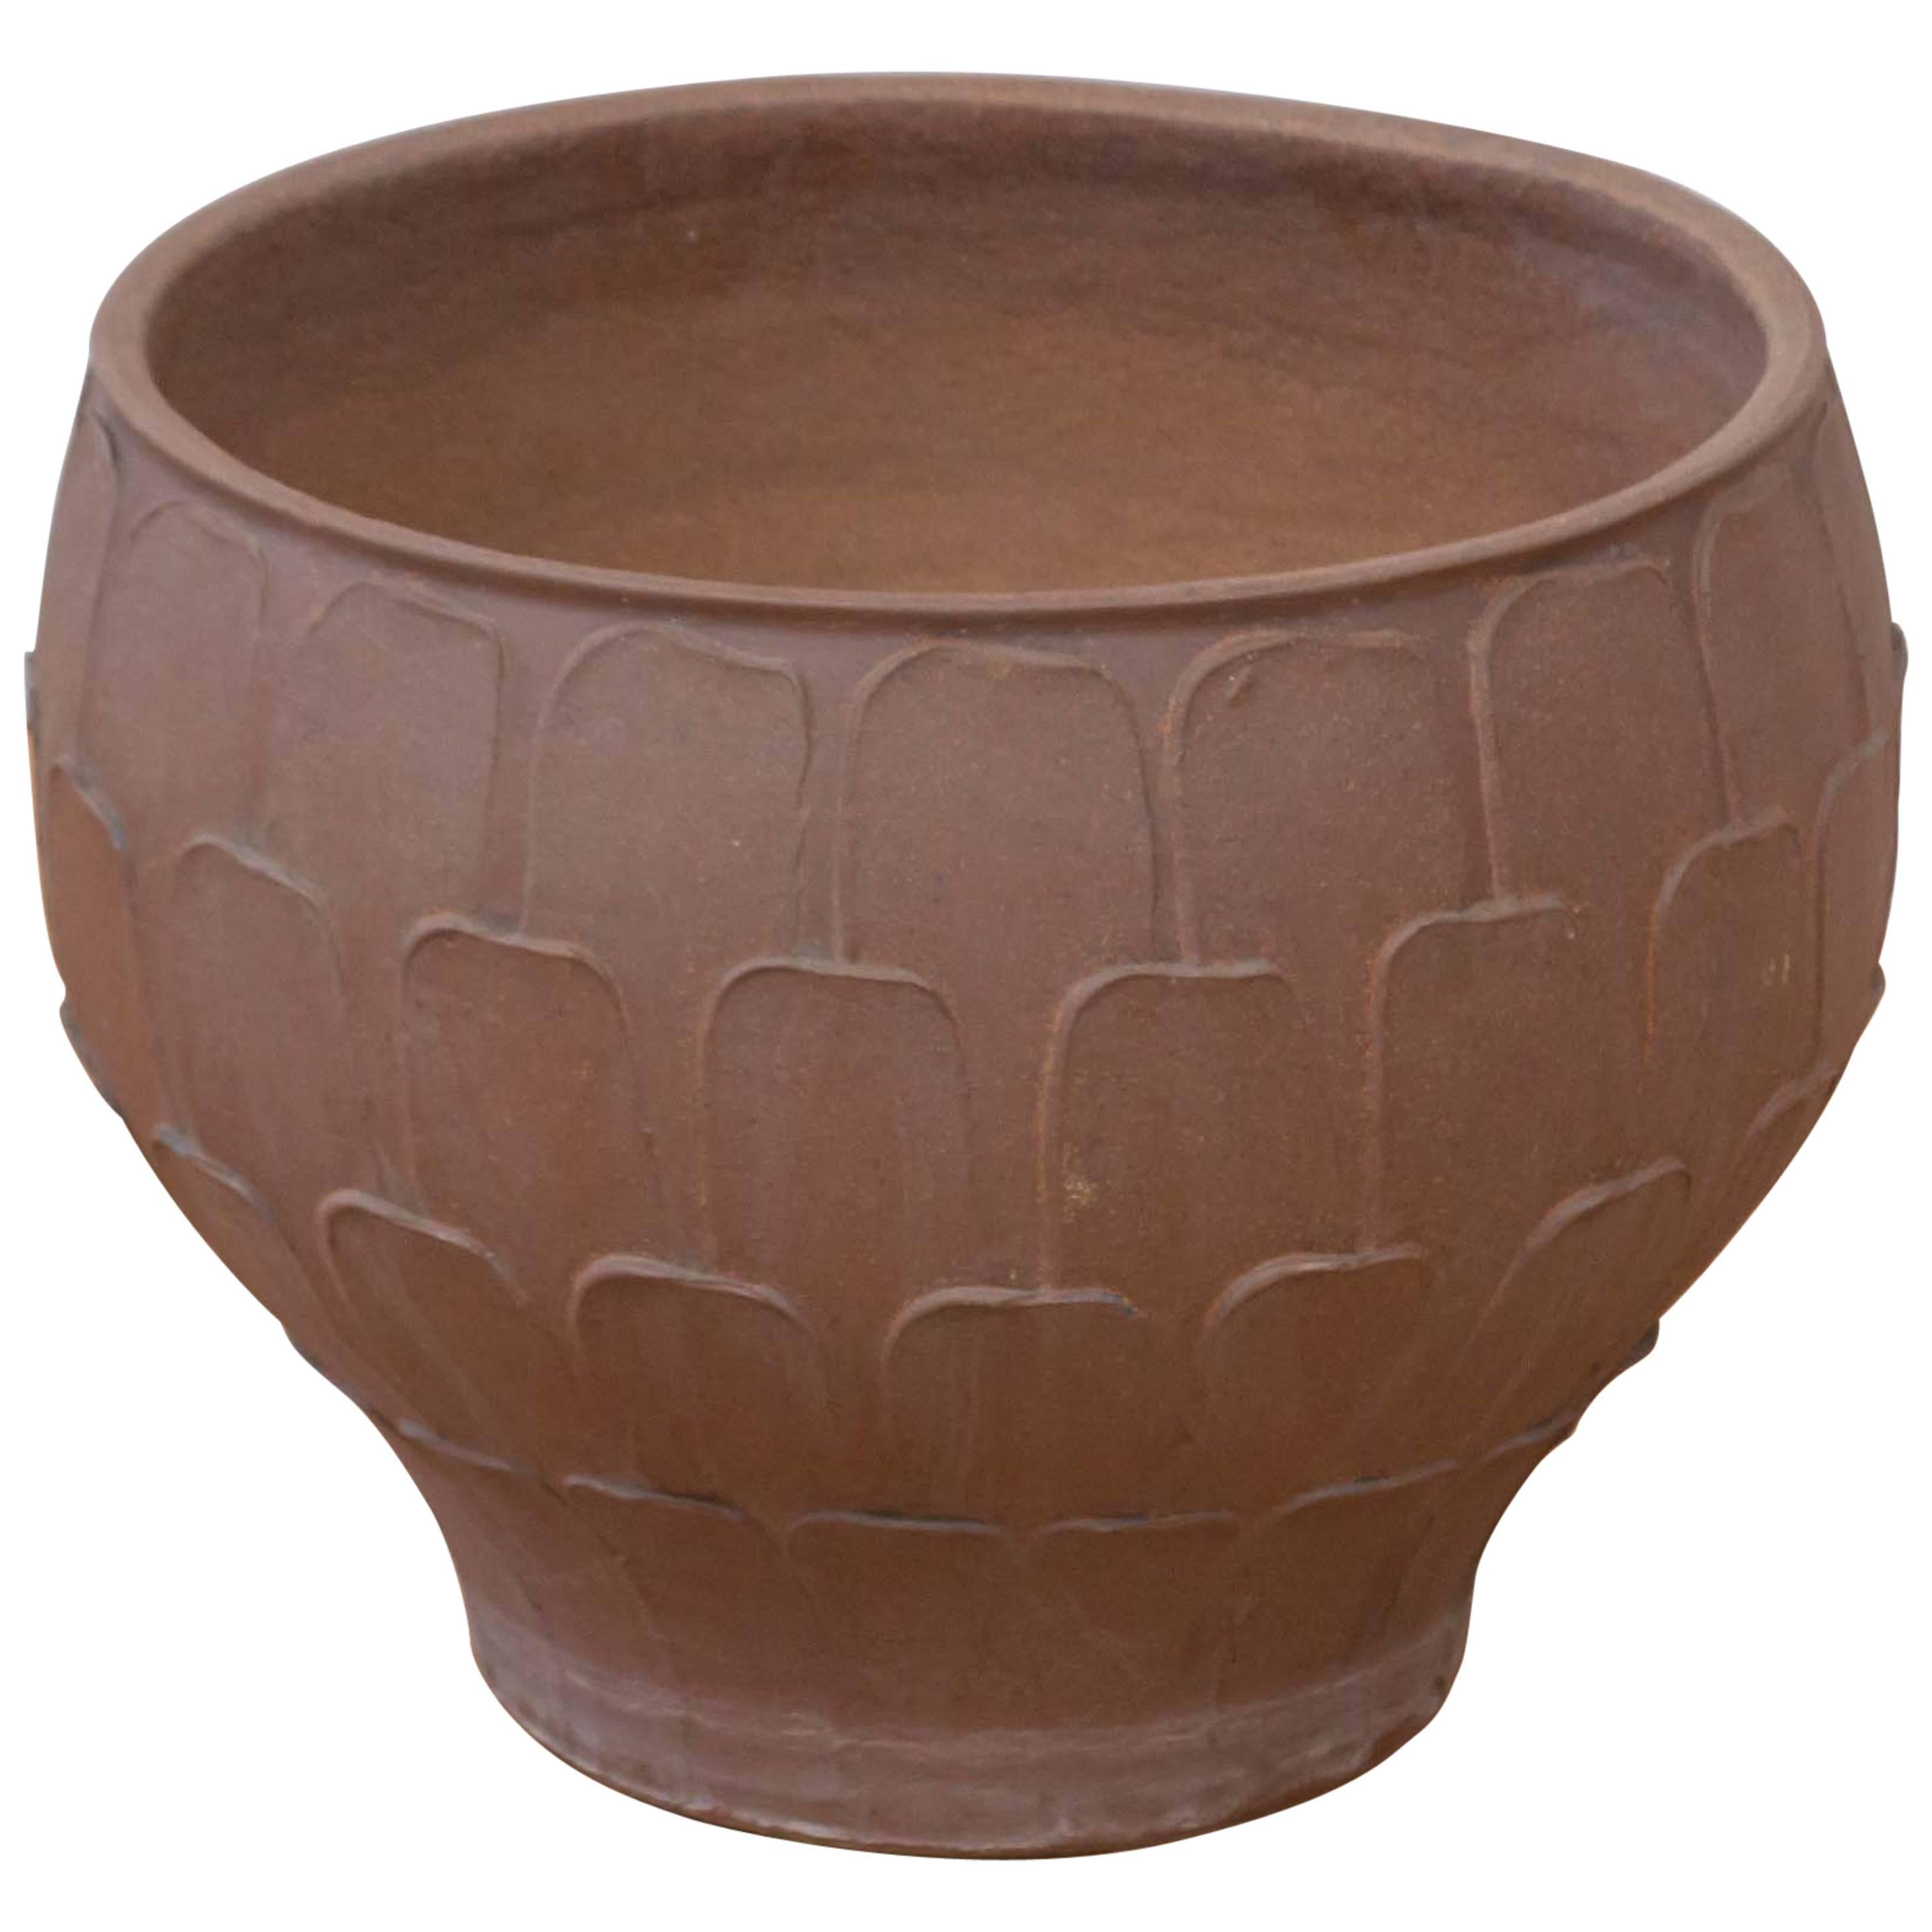 "Thumb Print" David Cressey for Architectural Pottery Planter